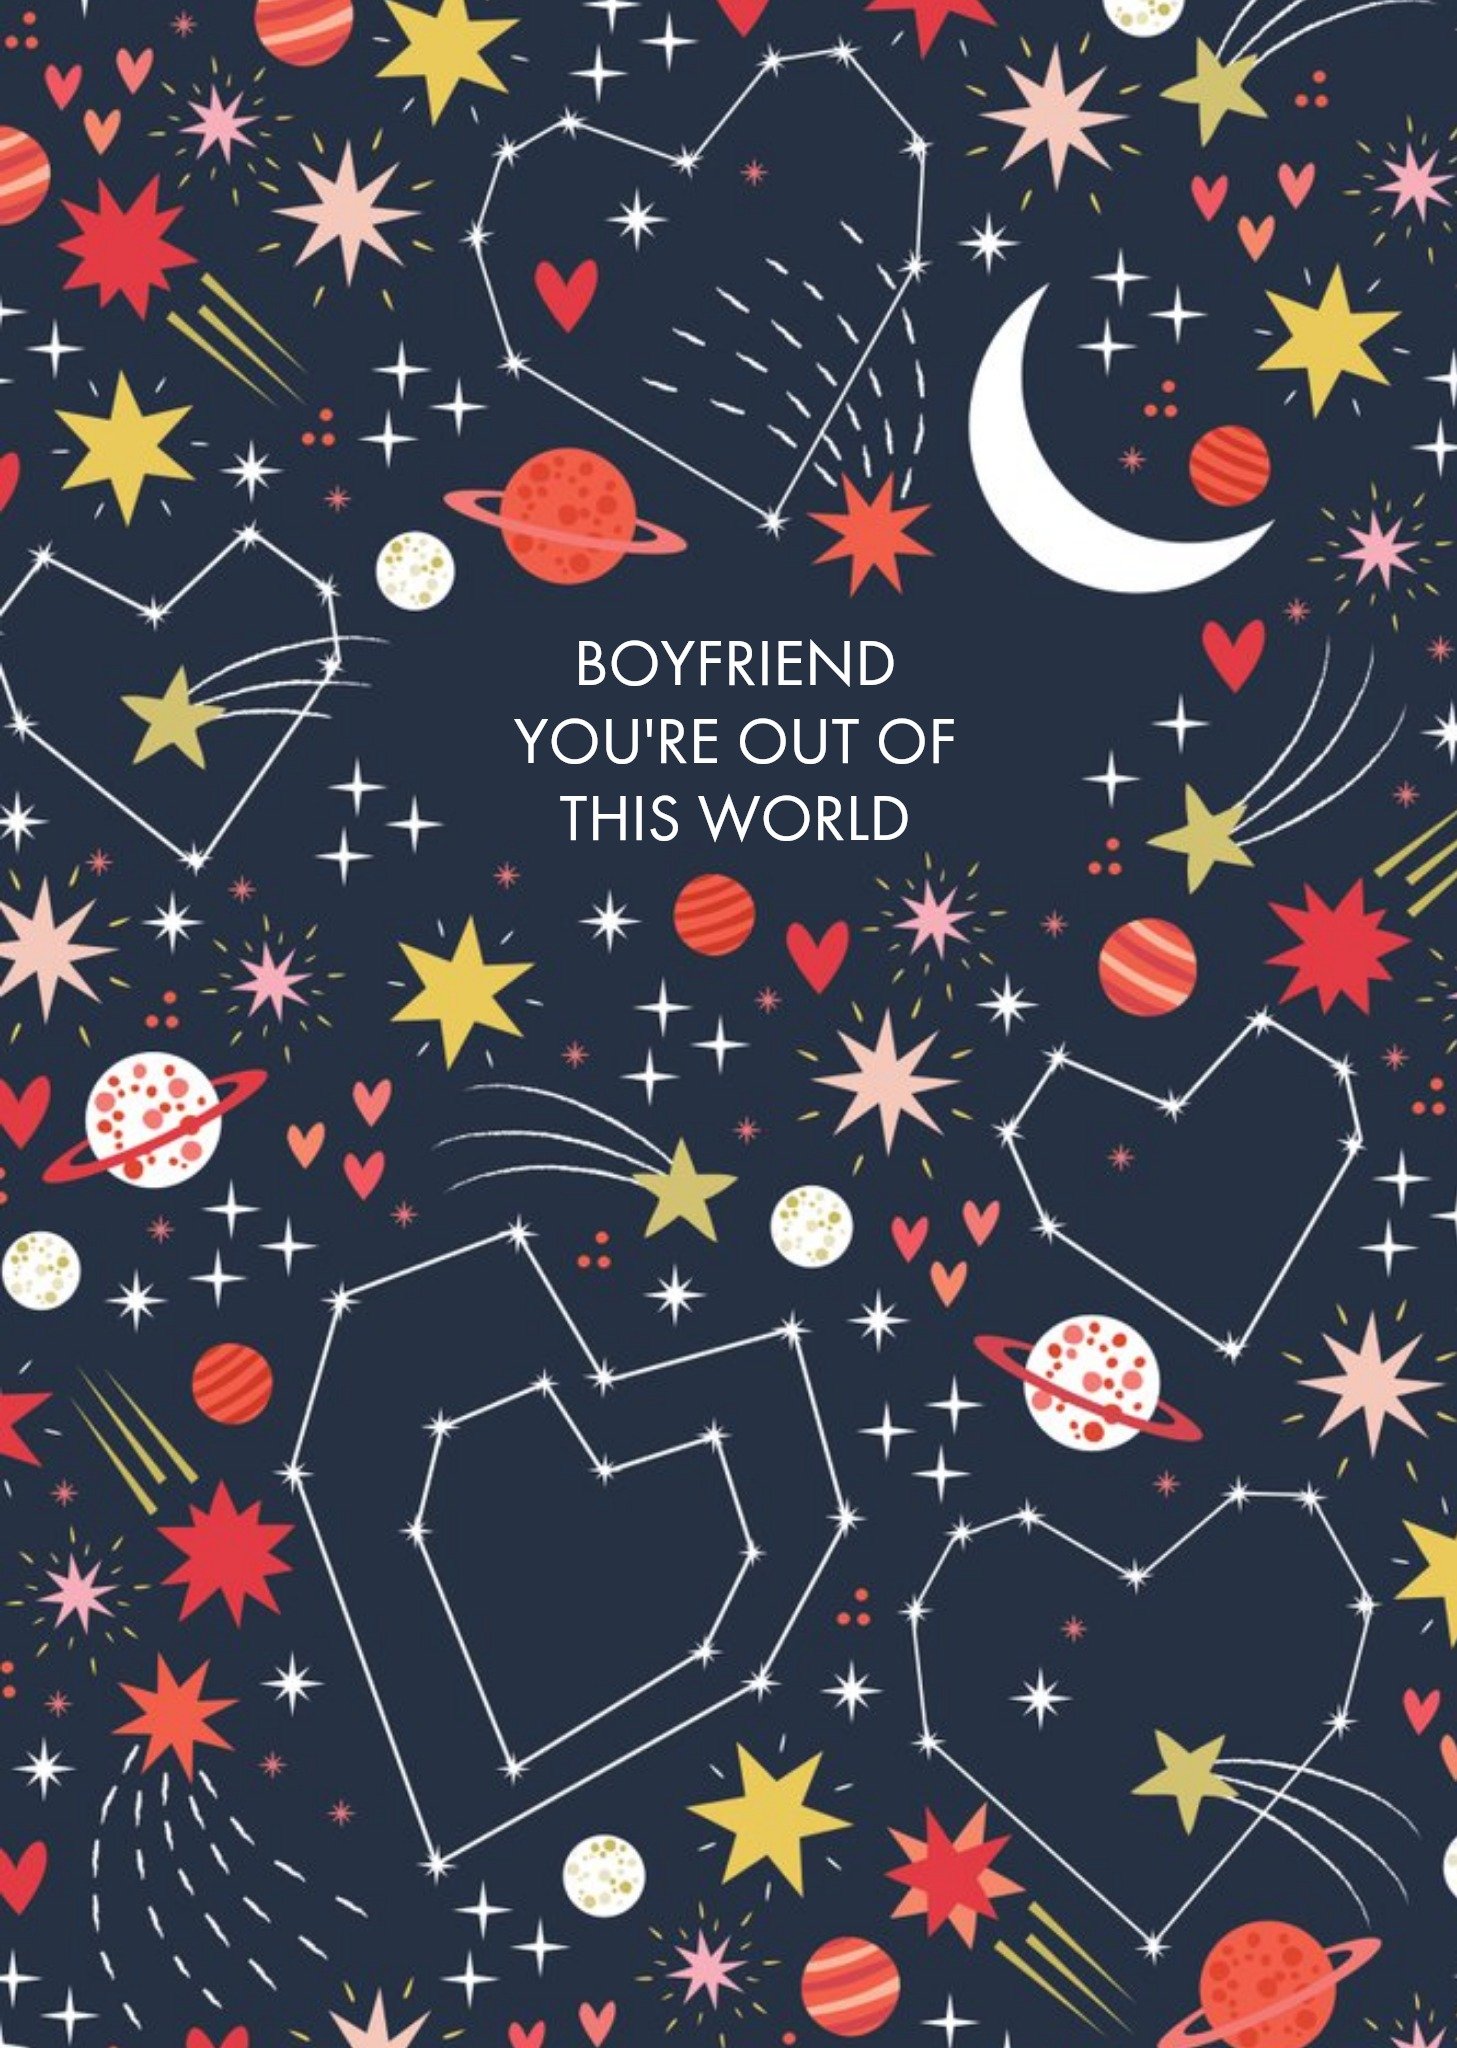 Moonpig Colourful Cosmos You're Out Of This World Boyfriend Valentine's Card, Large